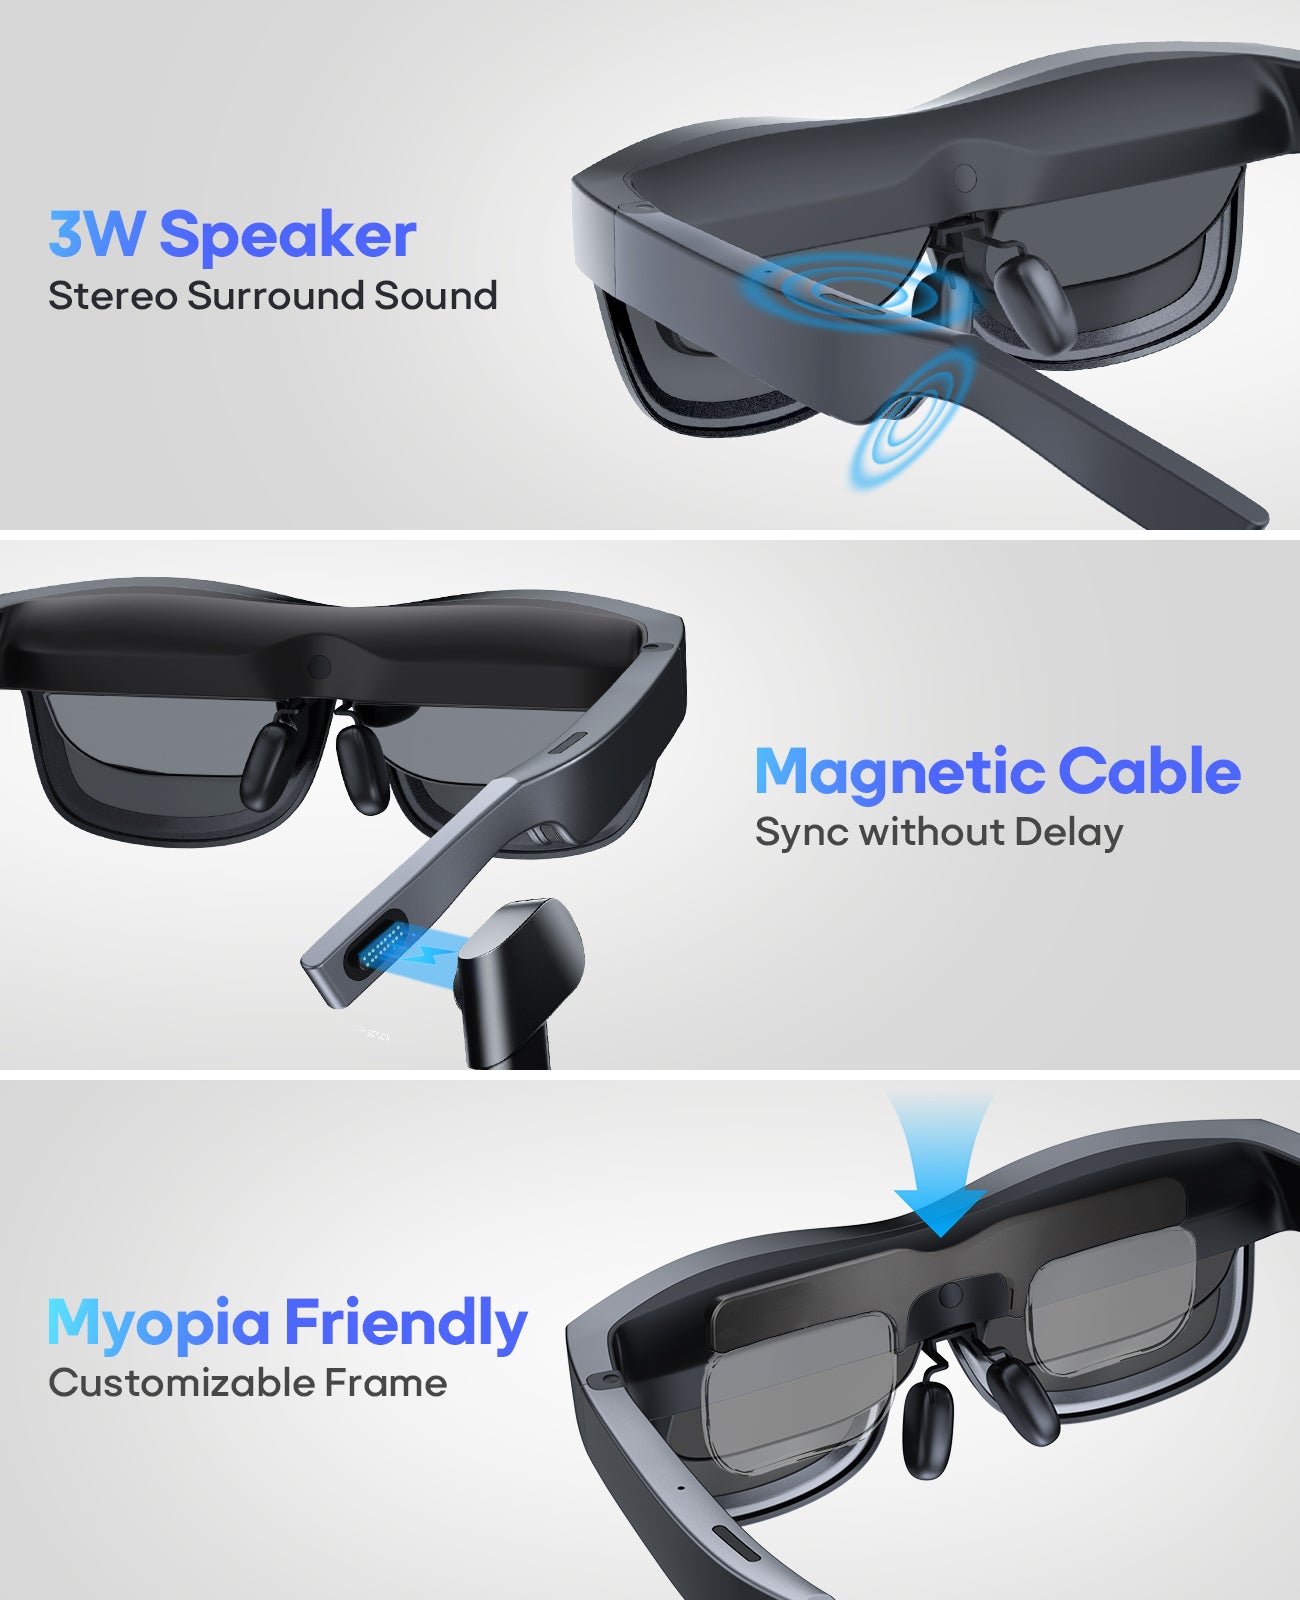 AR Glasses, Smart Glasses with Massive 201 Inch Micro OLED Virtual Theater, 1080P, 3D Movie, 50° FOV, 400 nits Brightness, Support Stream, Game and Work on PC/Android/iOS/Consoles/Cloud